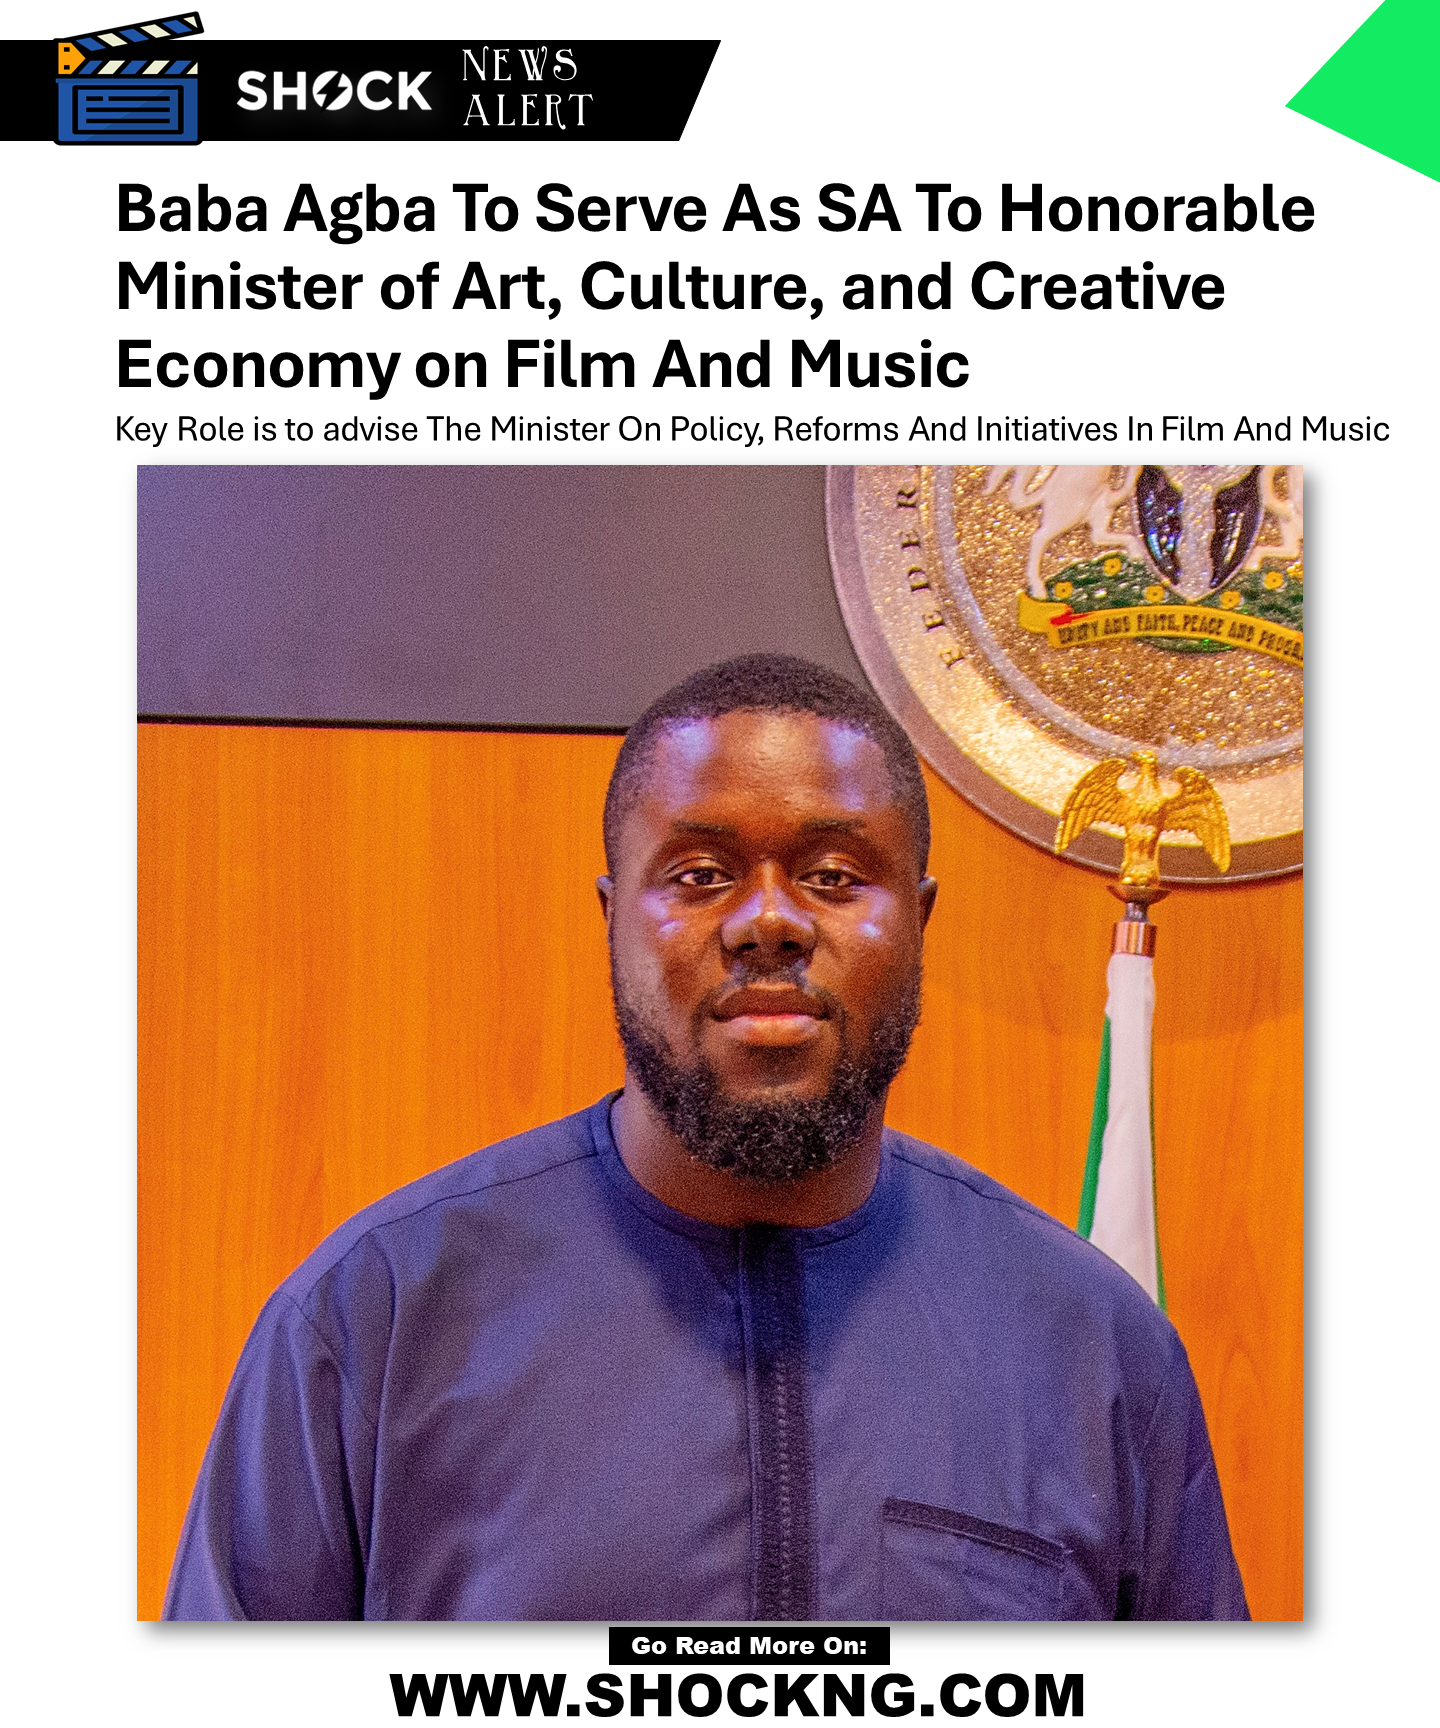 Baba Agba SA annocuemnt  - Baba Agba To Serve As SA To Honorable Minister of Art, Culture, and Creative Economy on Film And Music